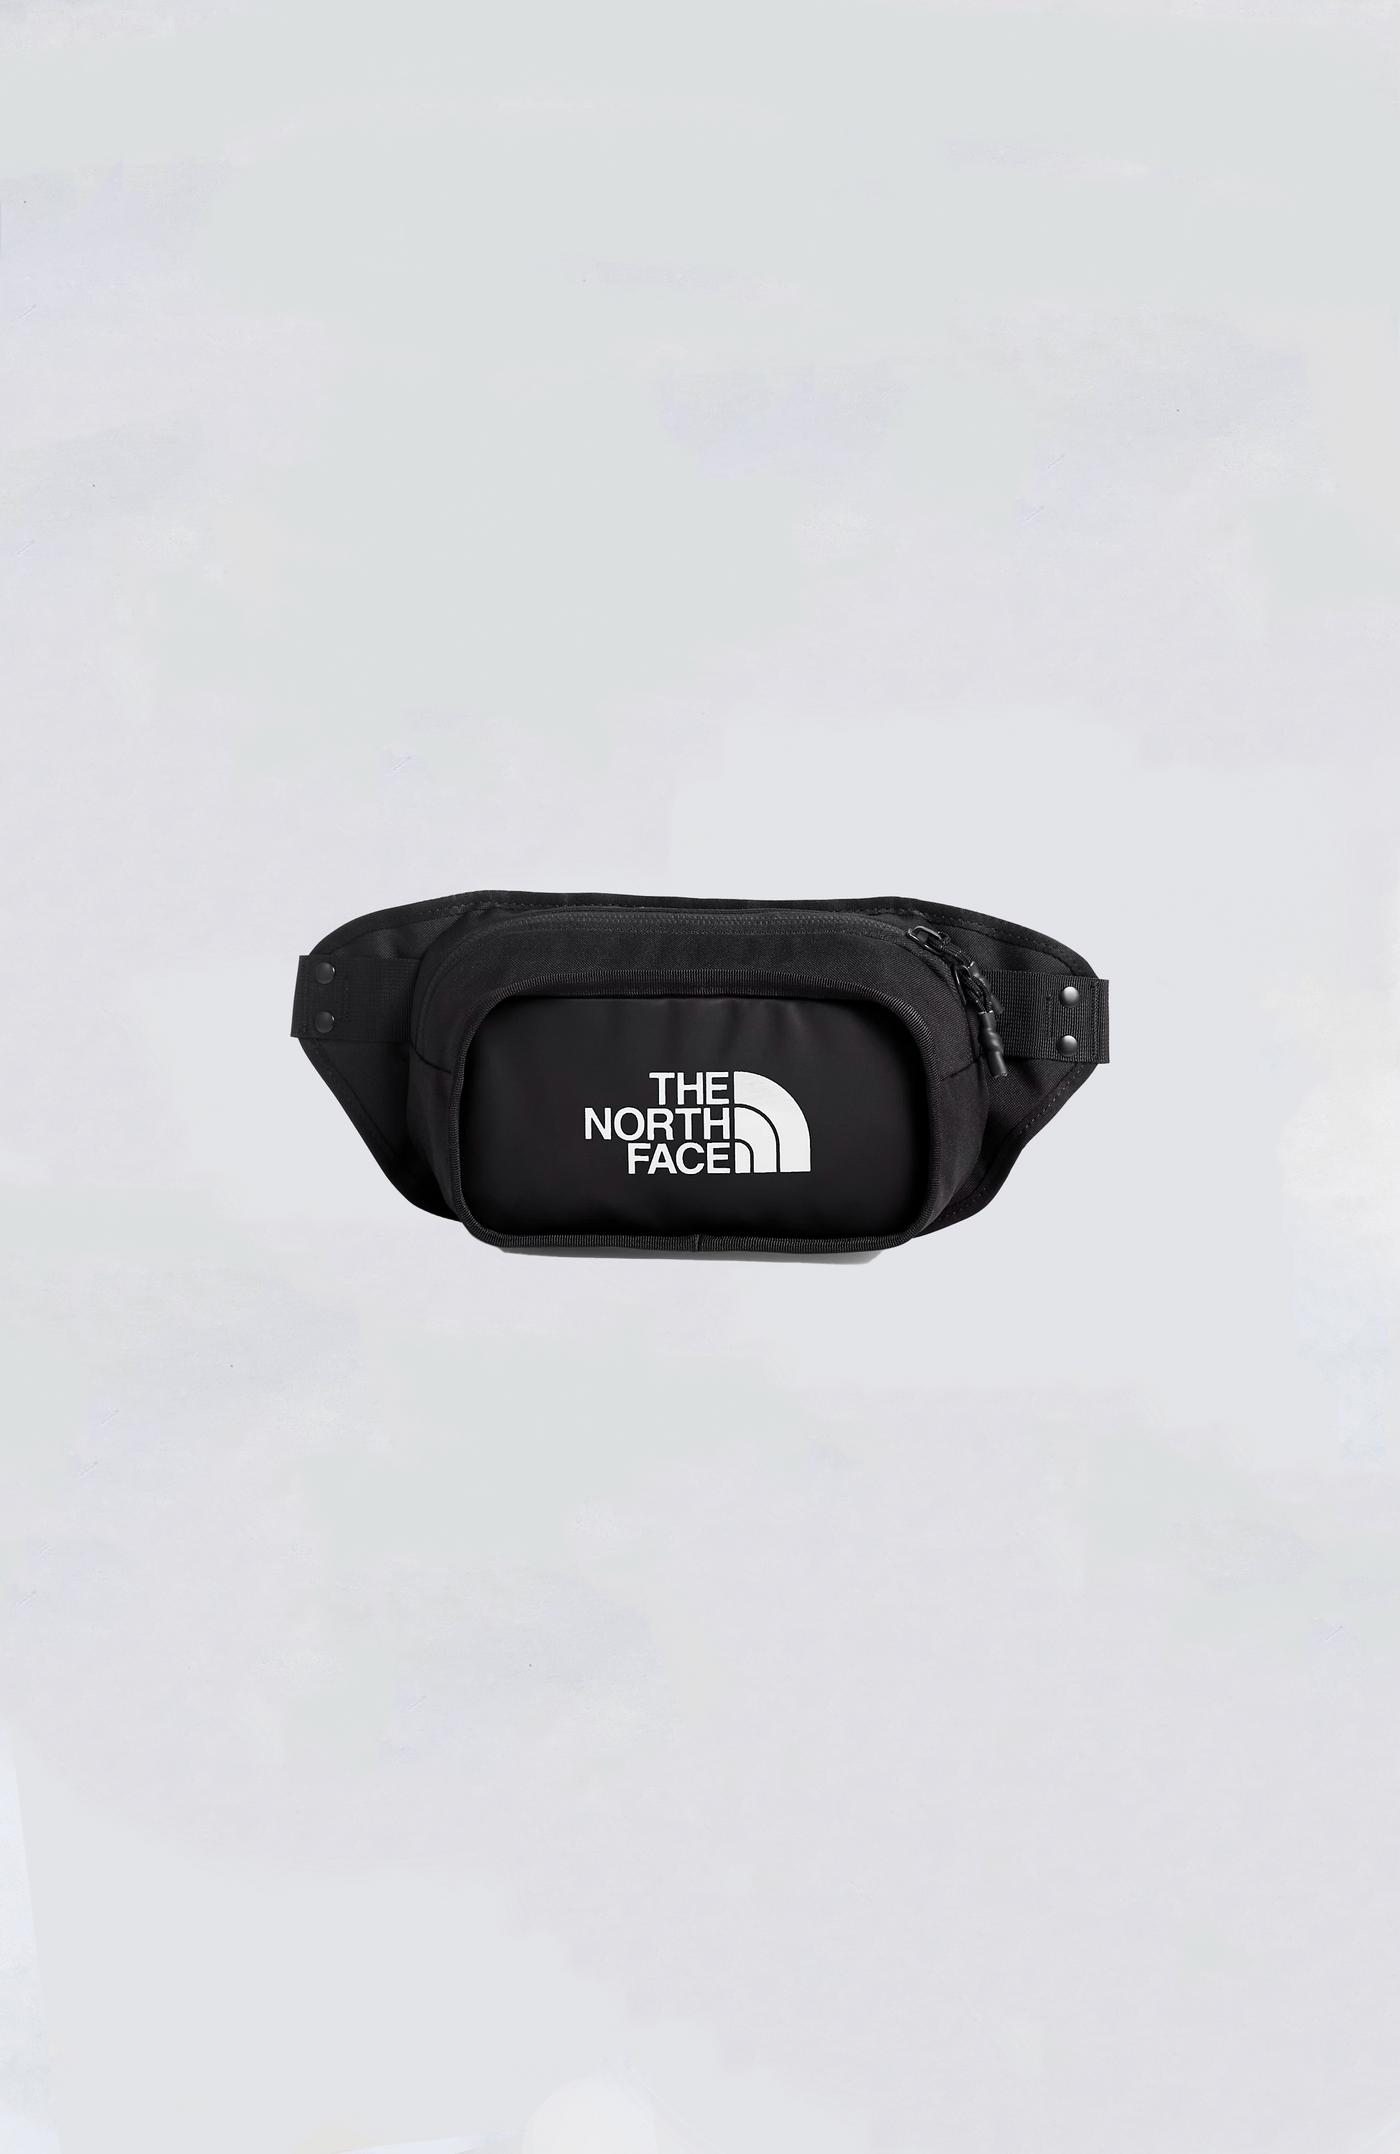 The North Face Hip Pack - Explore Hip Pack